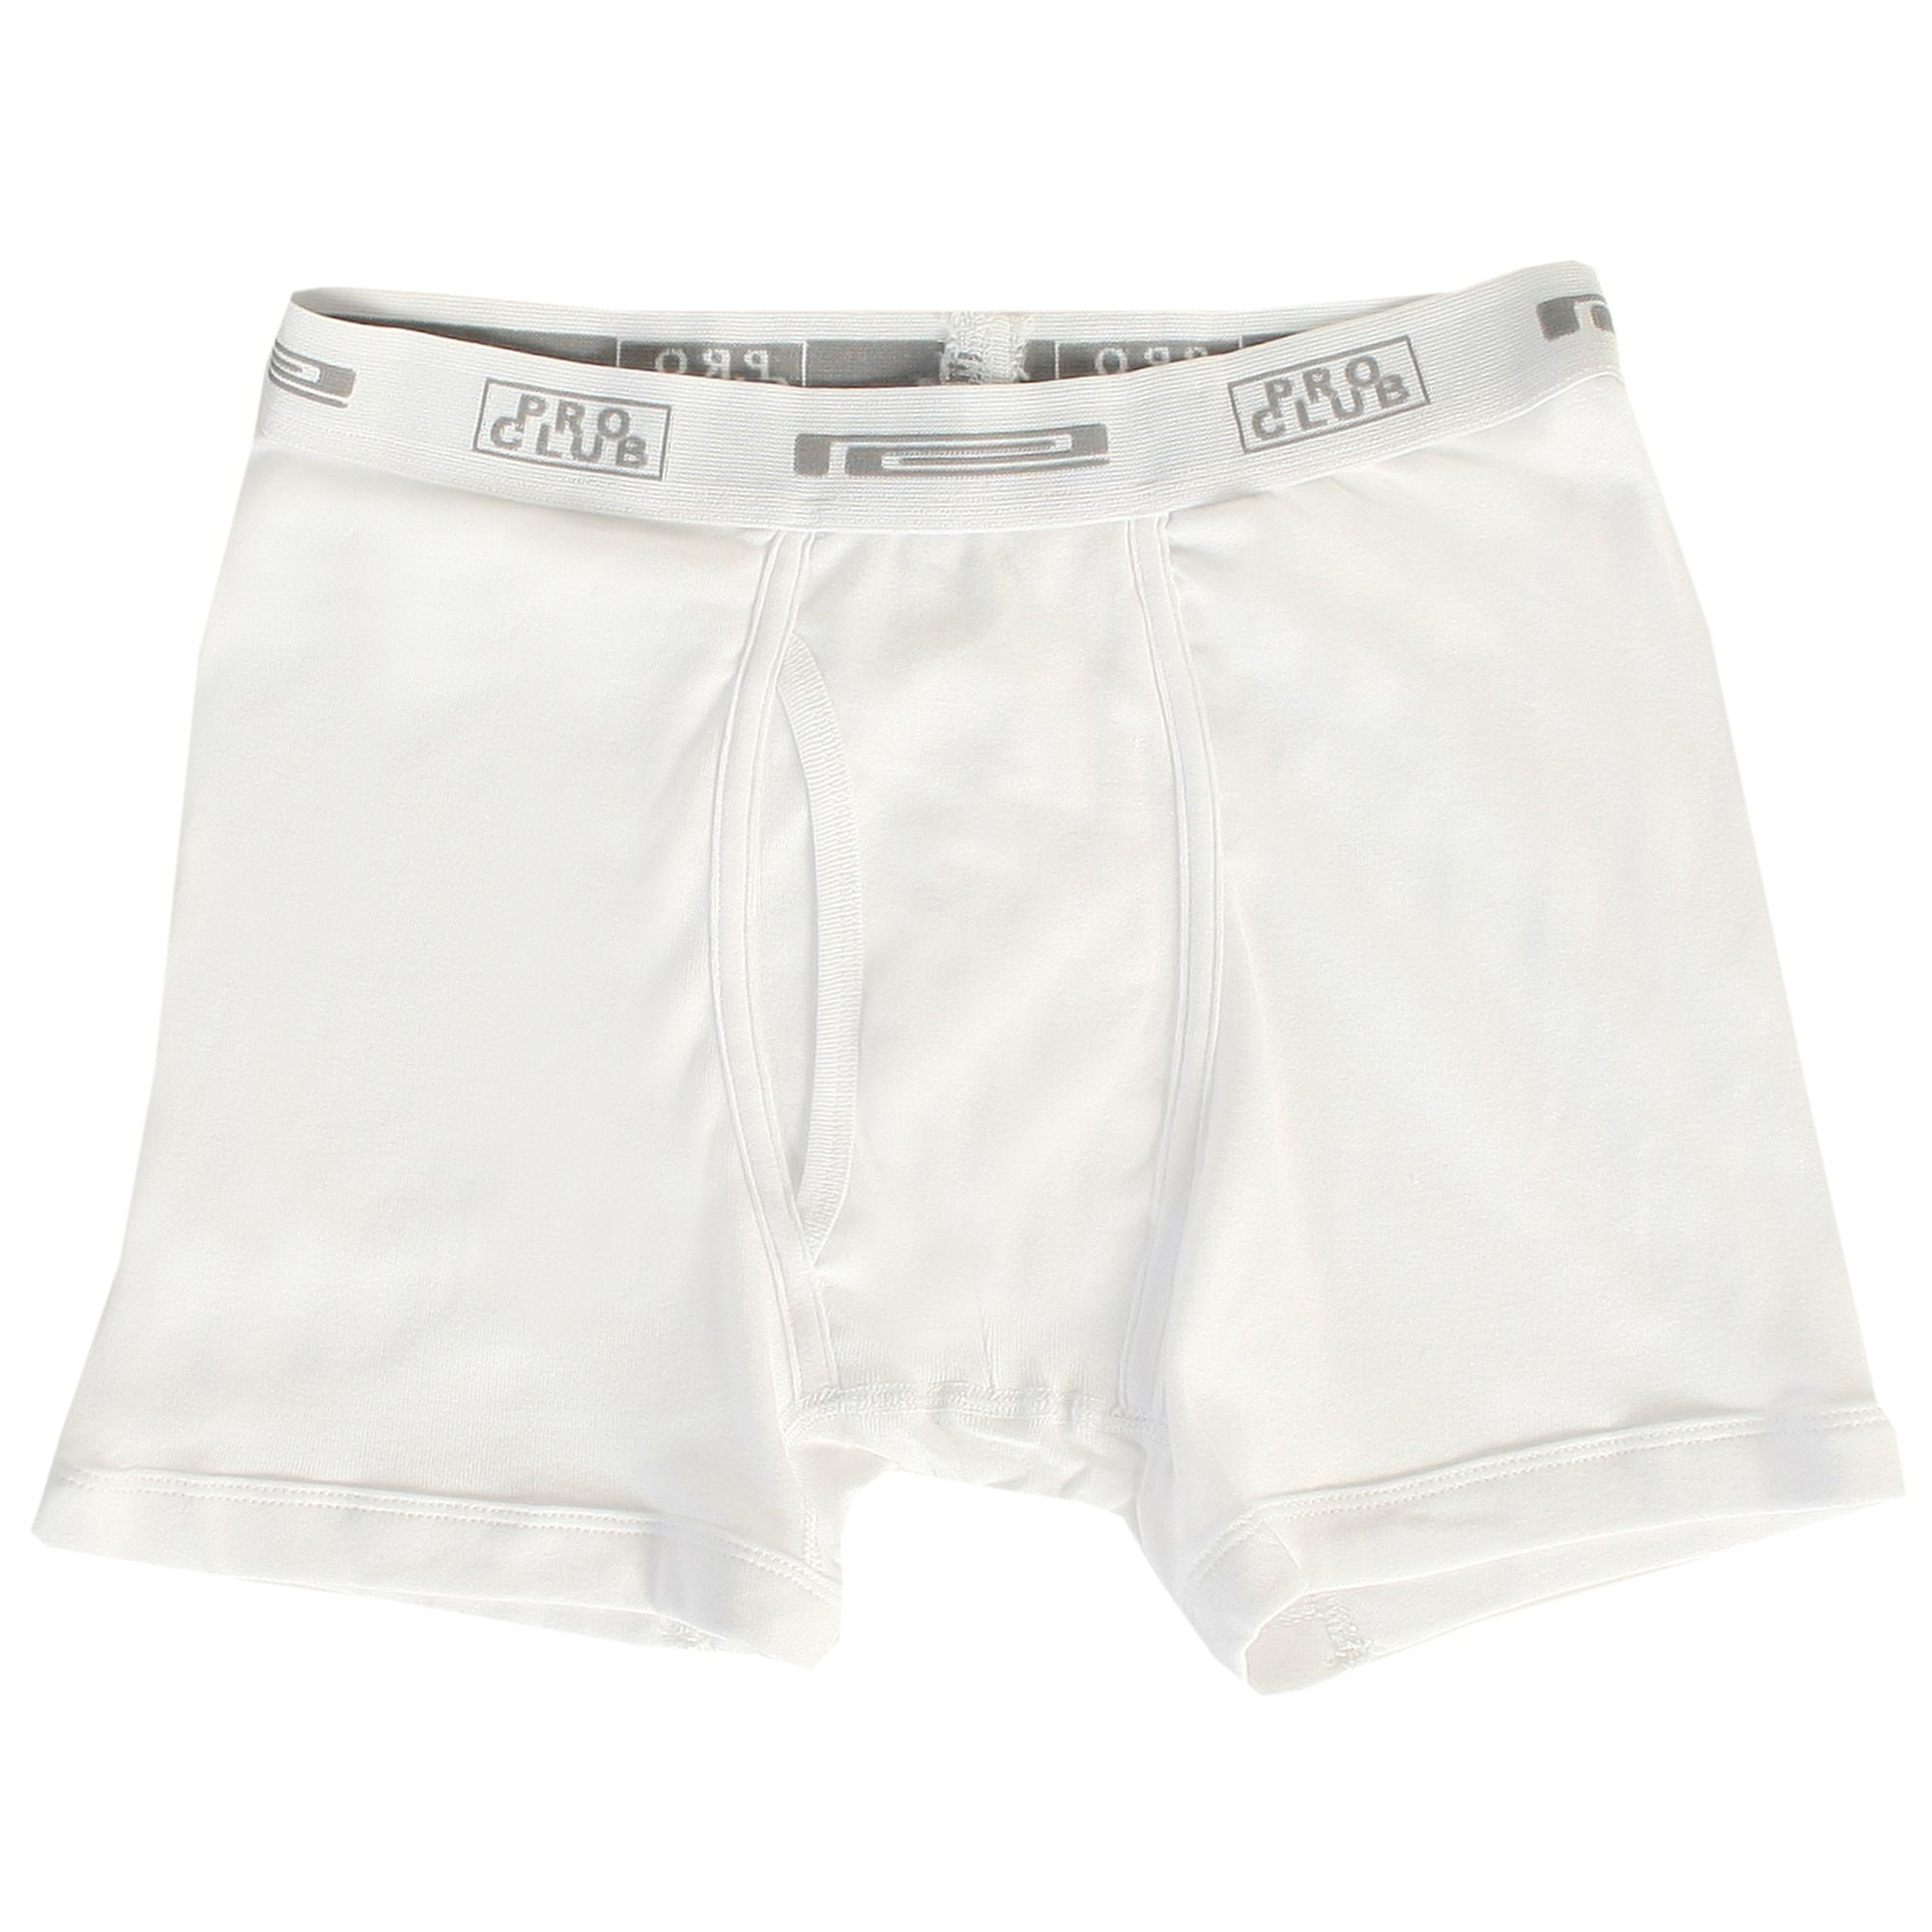 Mens Clothing Underwear Boxers briefs Save 30% Tom Ford Cotton 2pk Brief in White for Men 